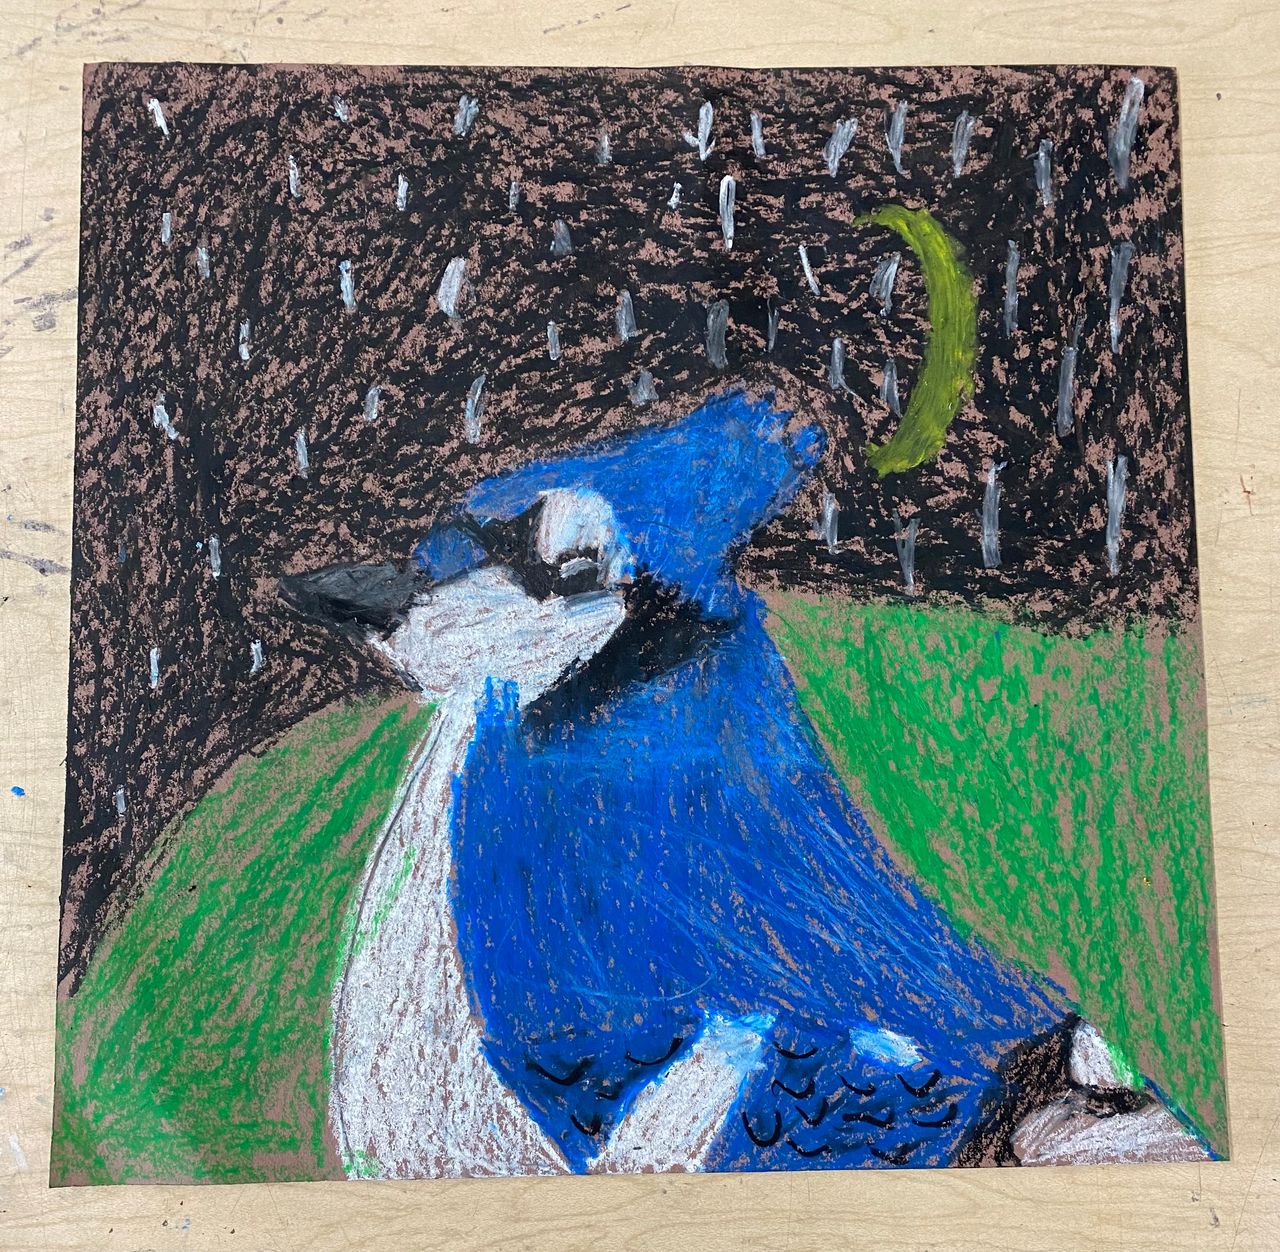 A young artist's portrait of a blue jay in crayon. The jay is in front of a night sky filled with stars and a crescent moon.